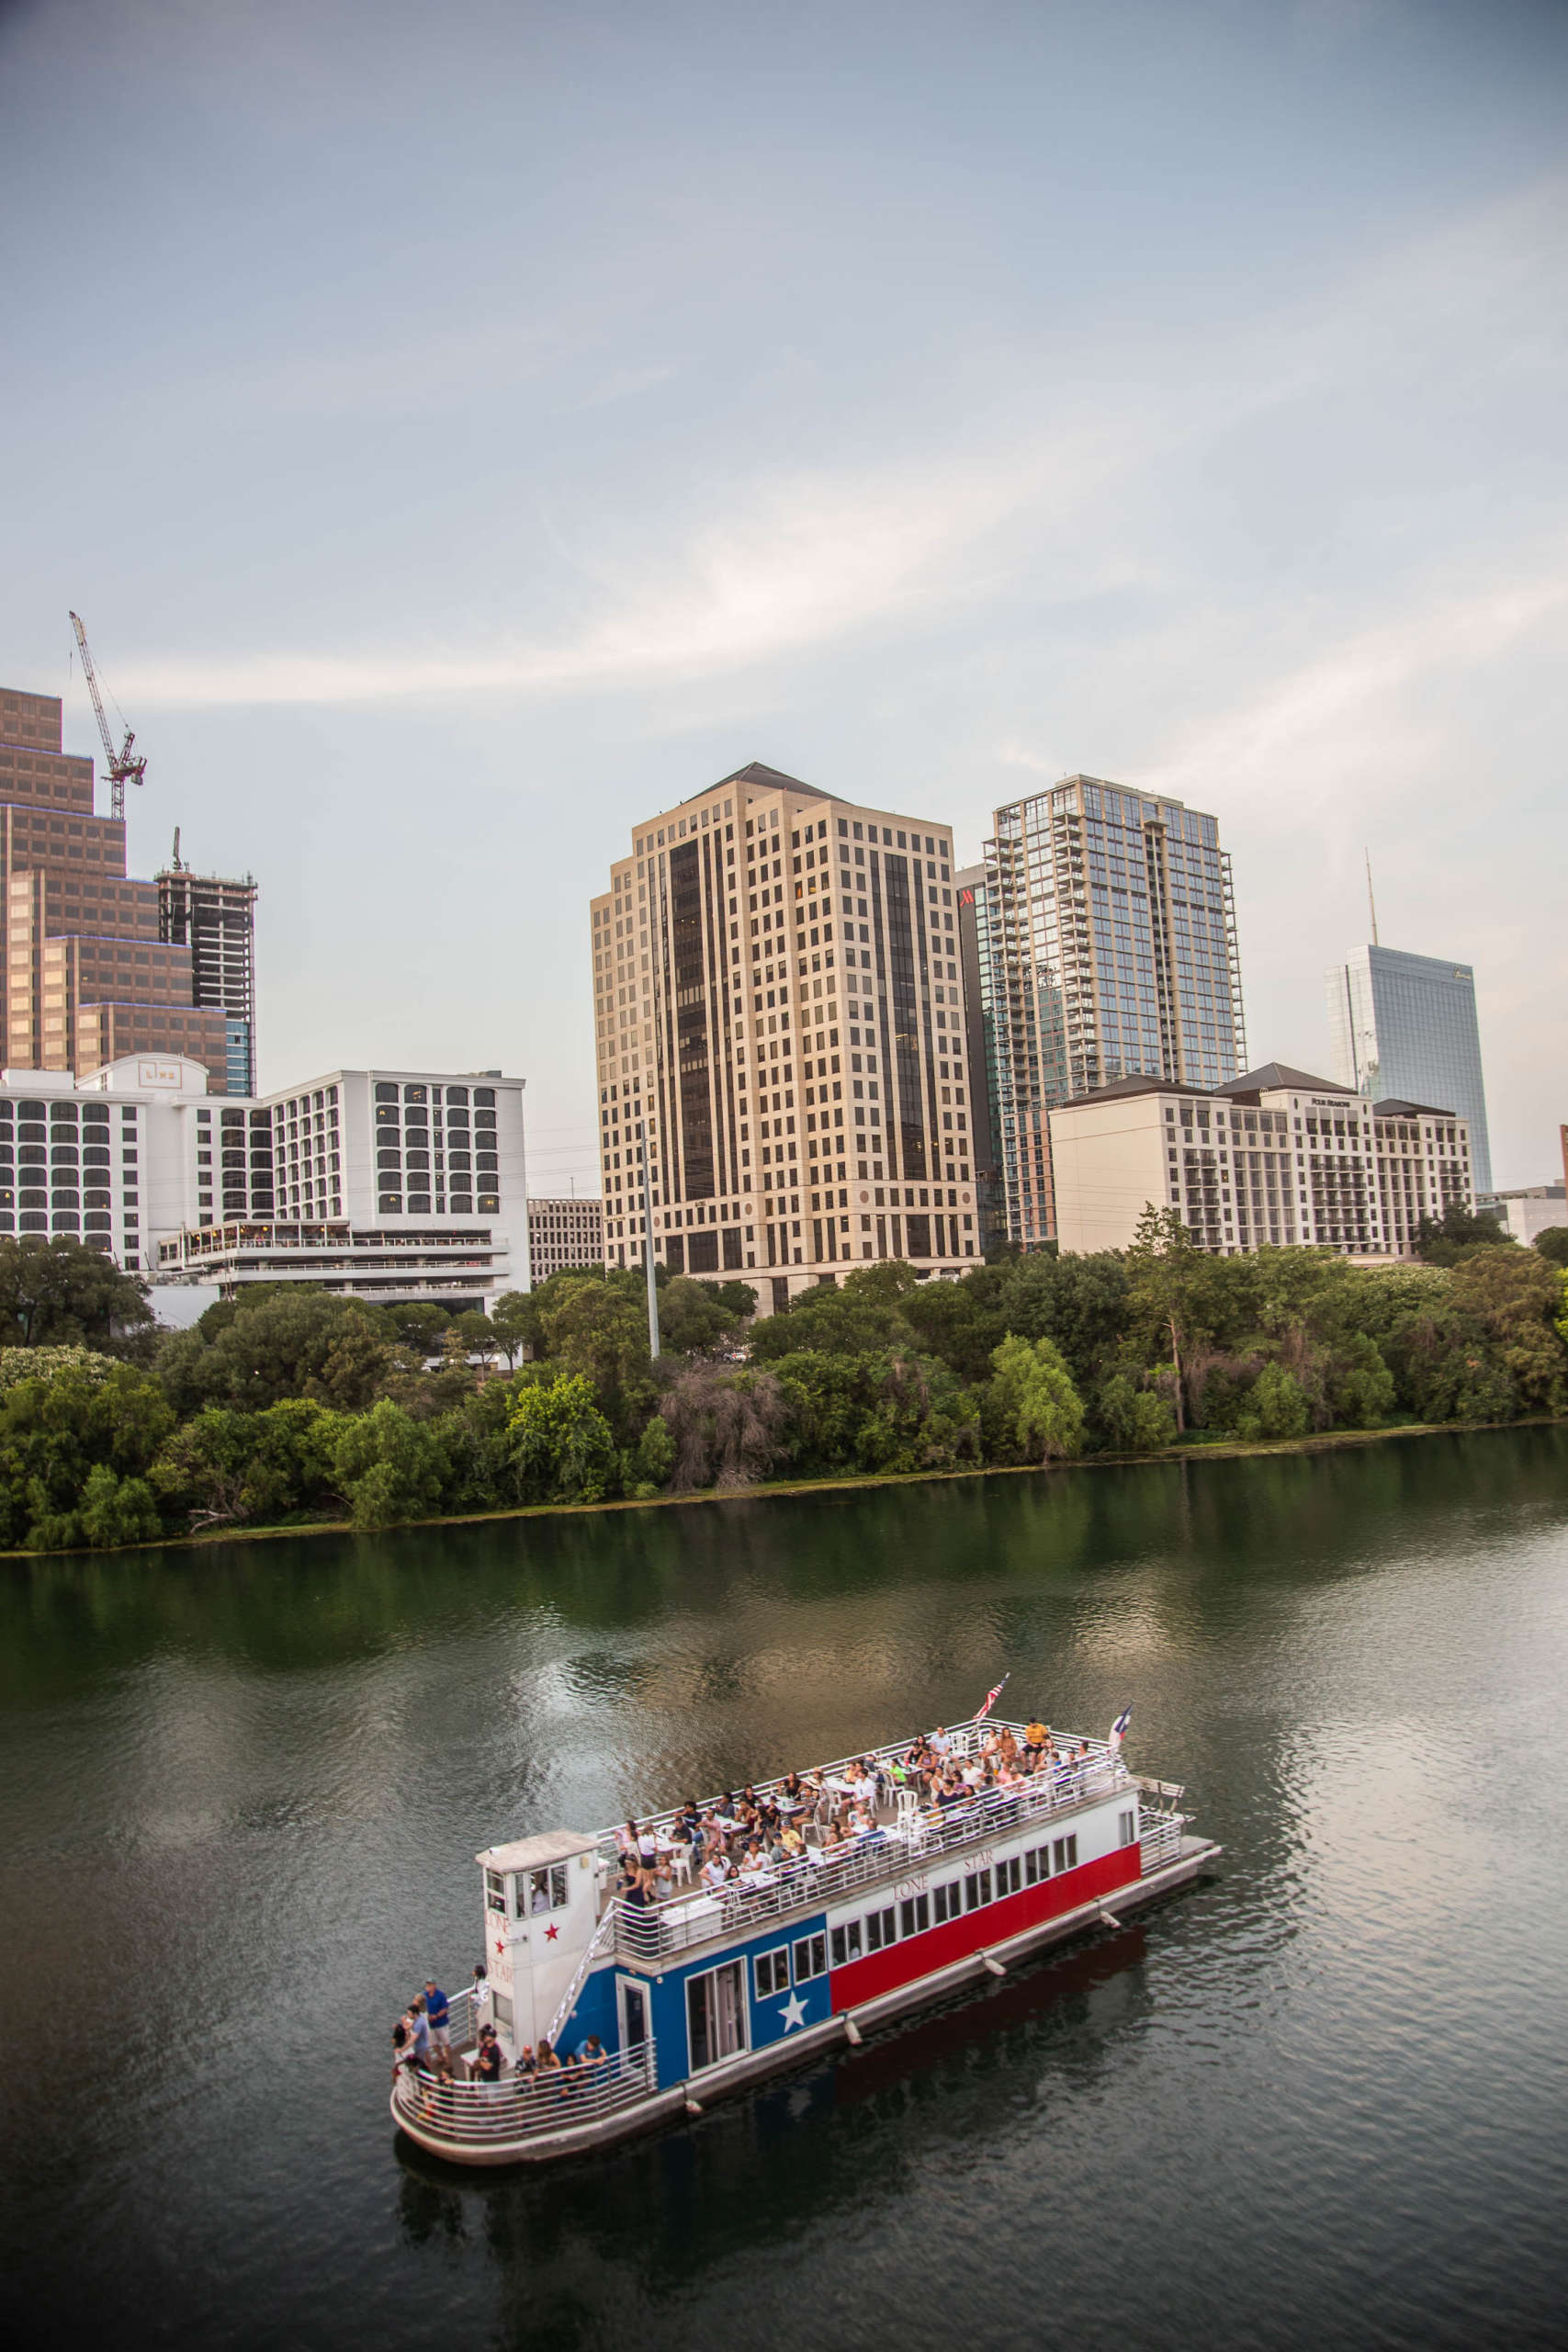 A ferryboat, decorated like the Texas flag, glides over a river. Its open top deck is packed with people, and several more stand at the curved front rail. In the background, trees line the river, and city buildings stand tall against a soft blue sky streaked with white clouds.